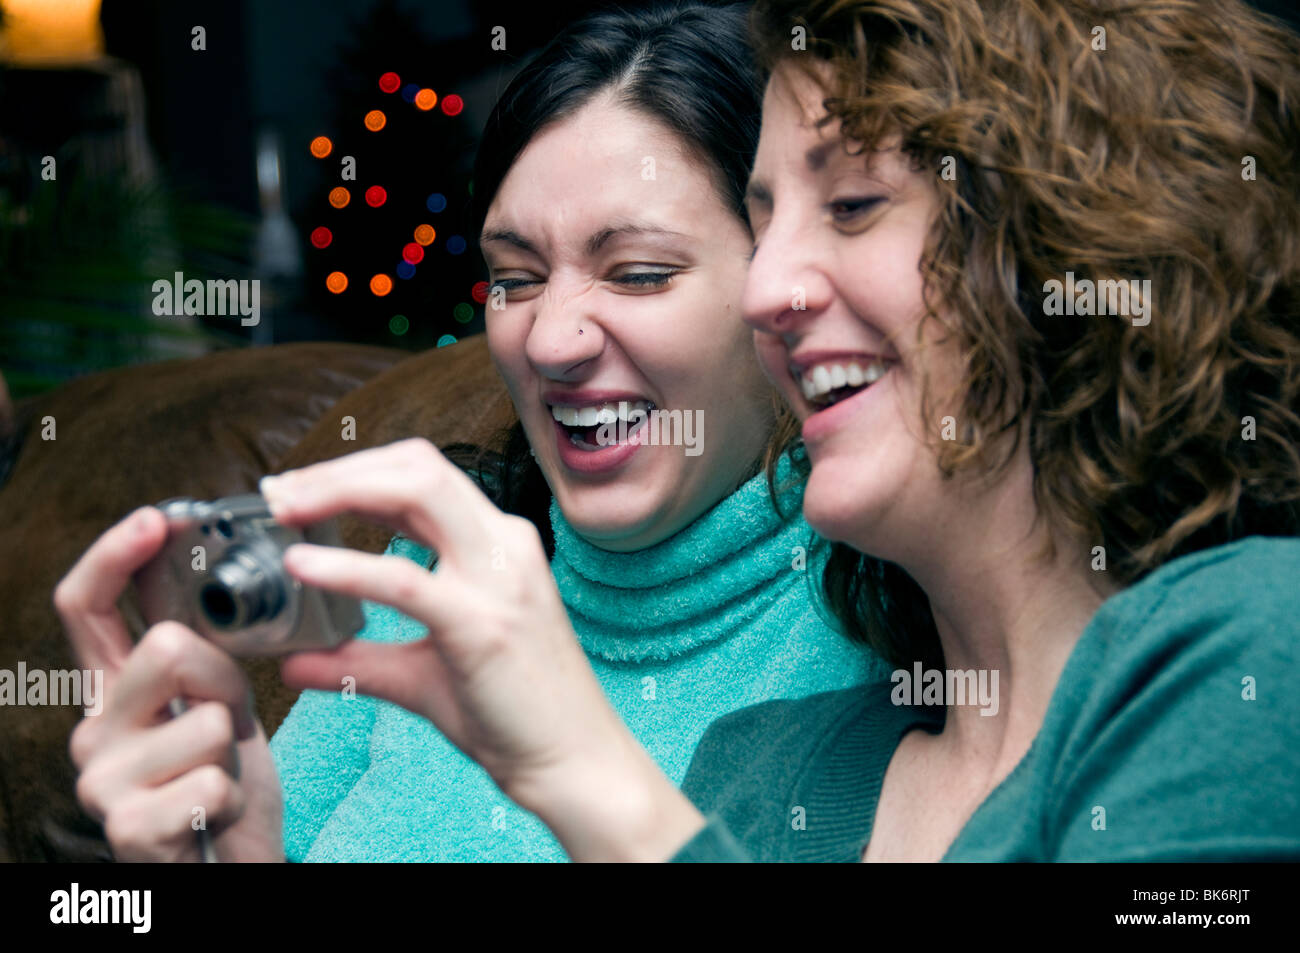 Two women review pictures on a digital camera and laugh together. Stock Photo